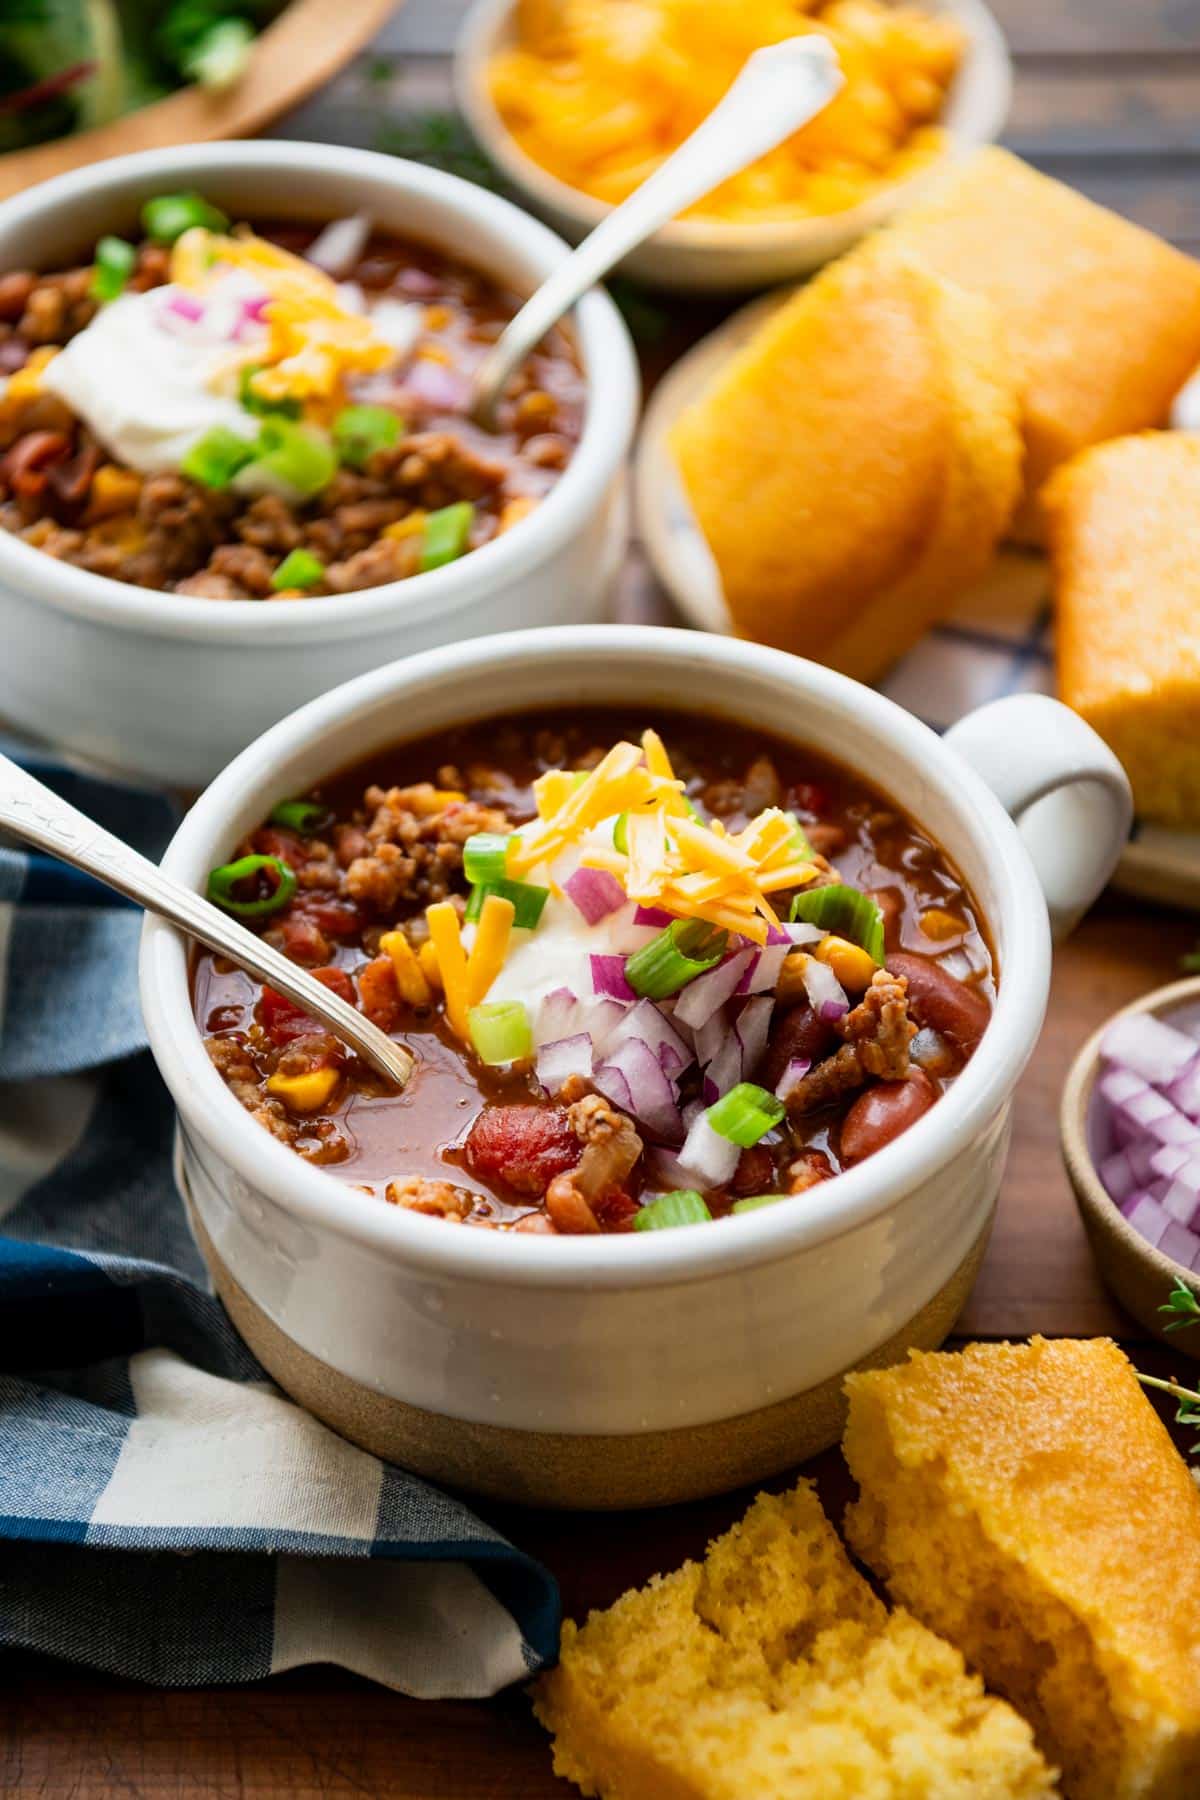 Spoon in a bowl of ground pork chili with cornbread on the side.